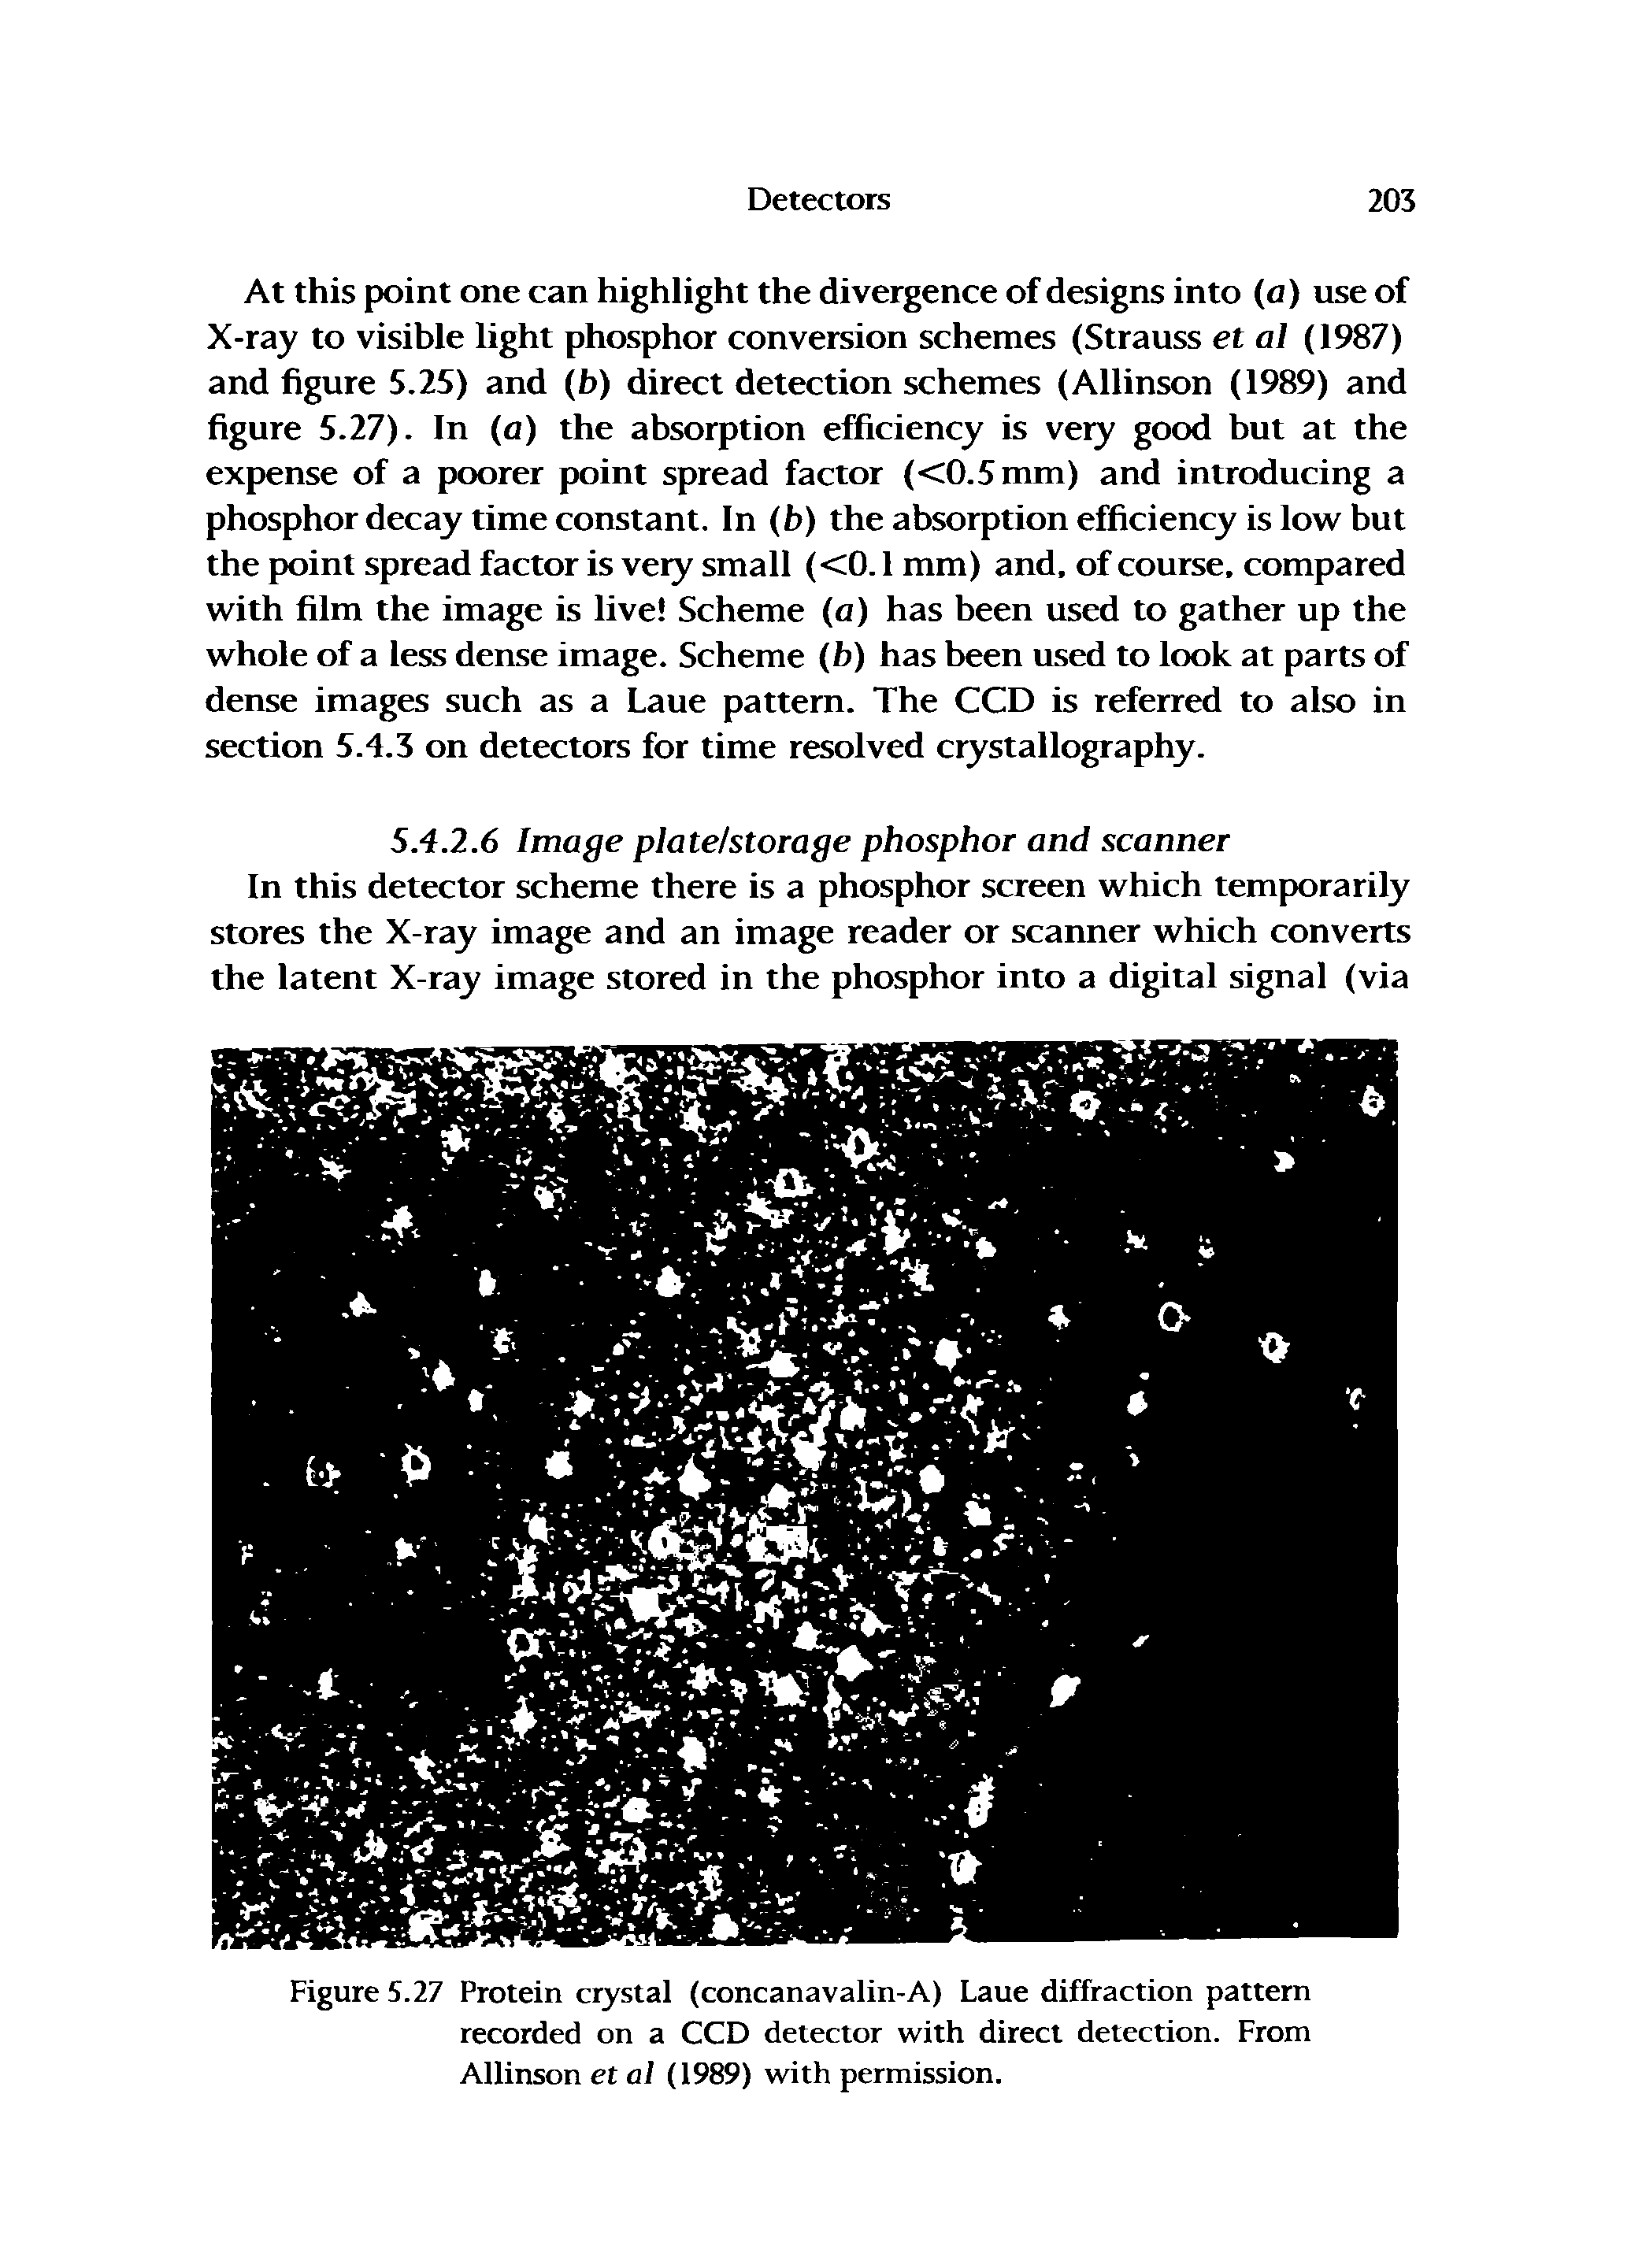 Figure 5.27 Protein crystal (concanavalin-A) Laue diffraction pattern recorded on a CCD detector with direct detection. From Allinson et al (1989) with permission.